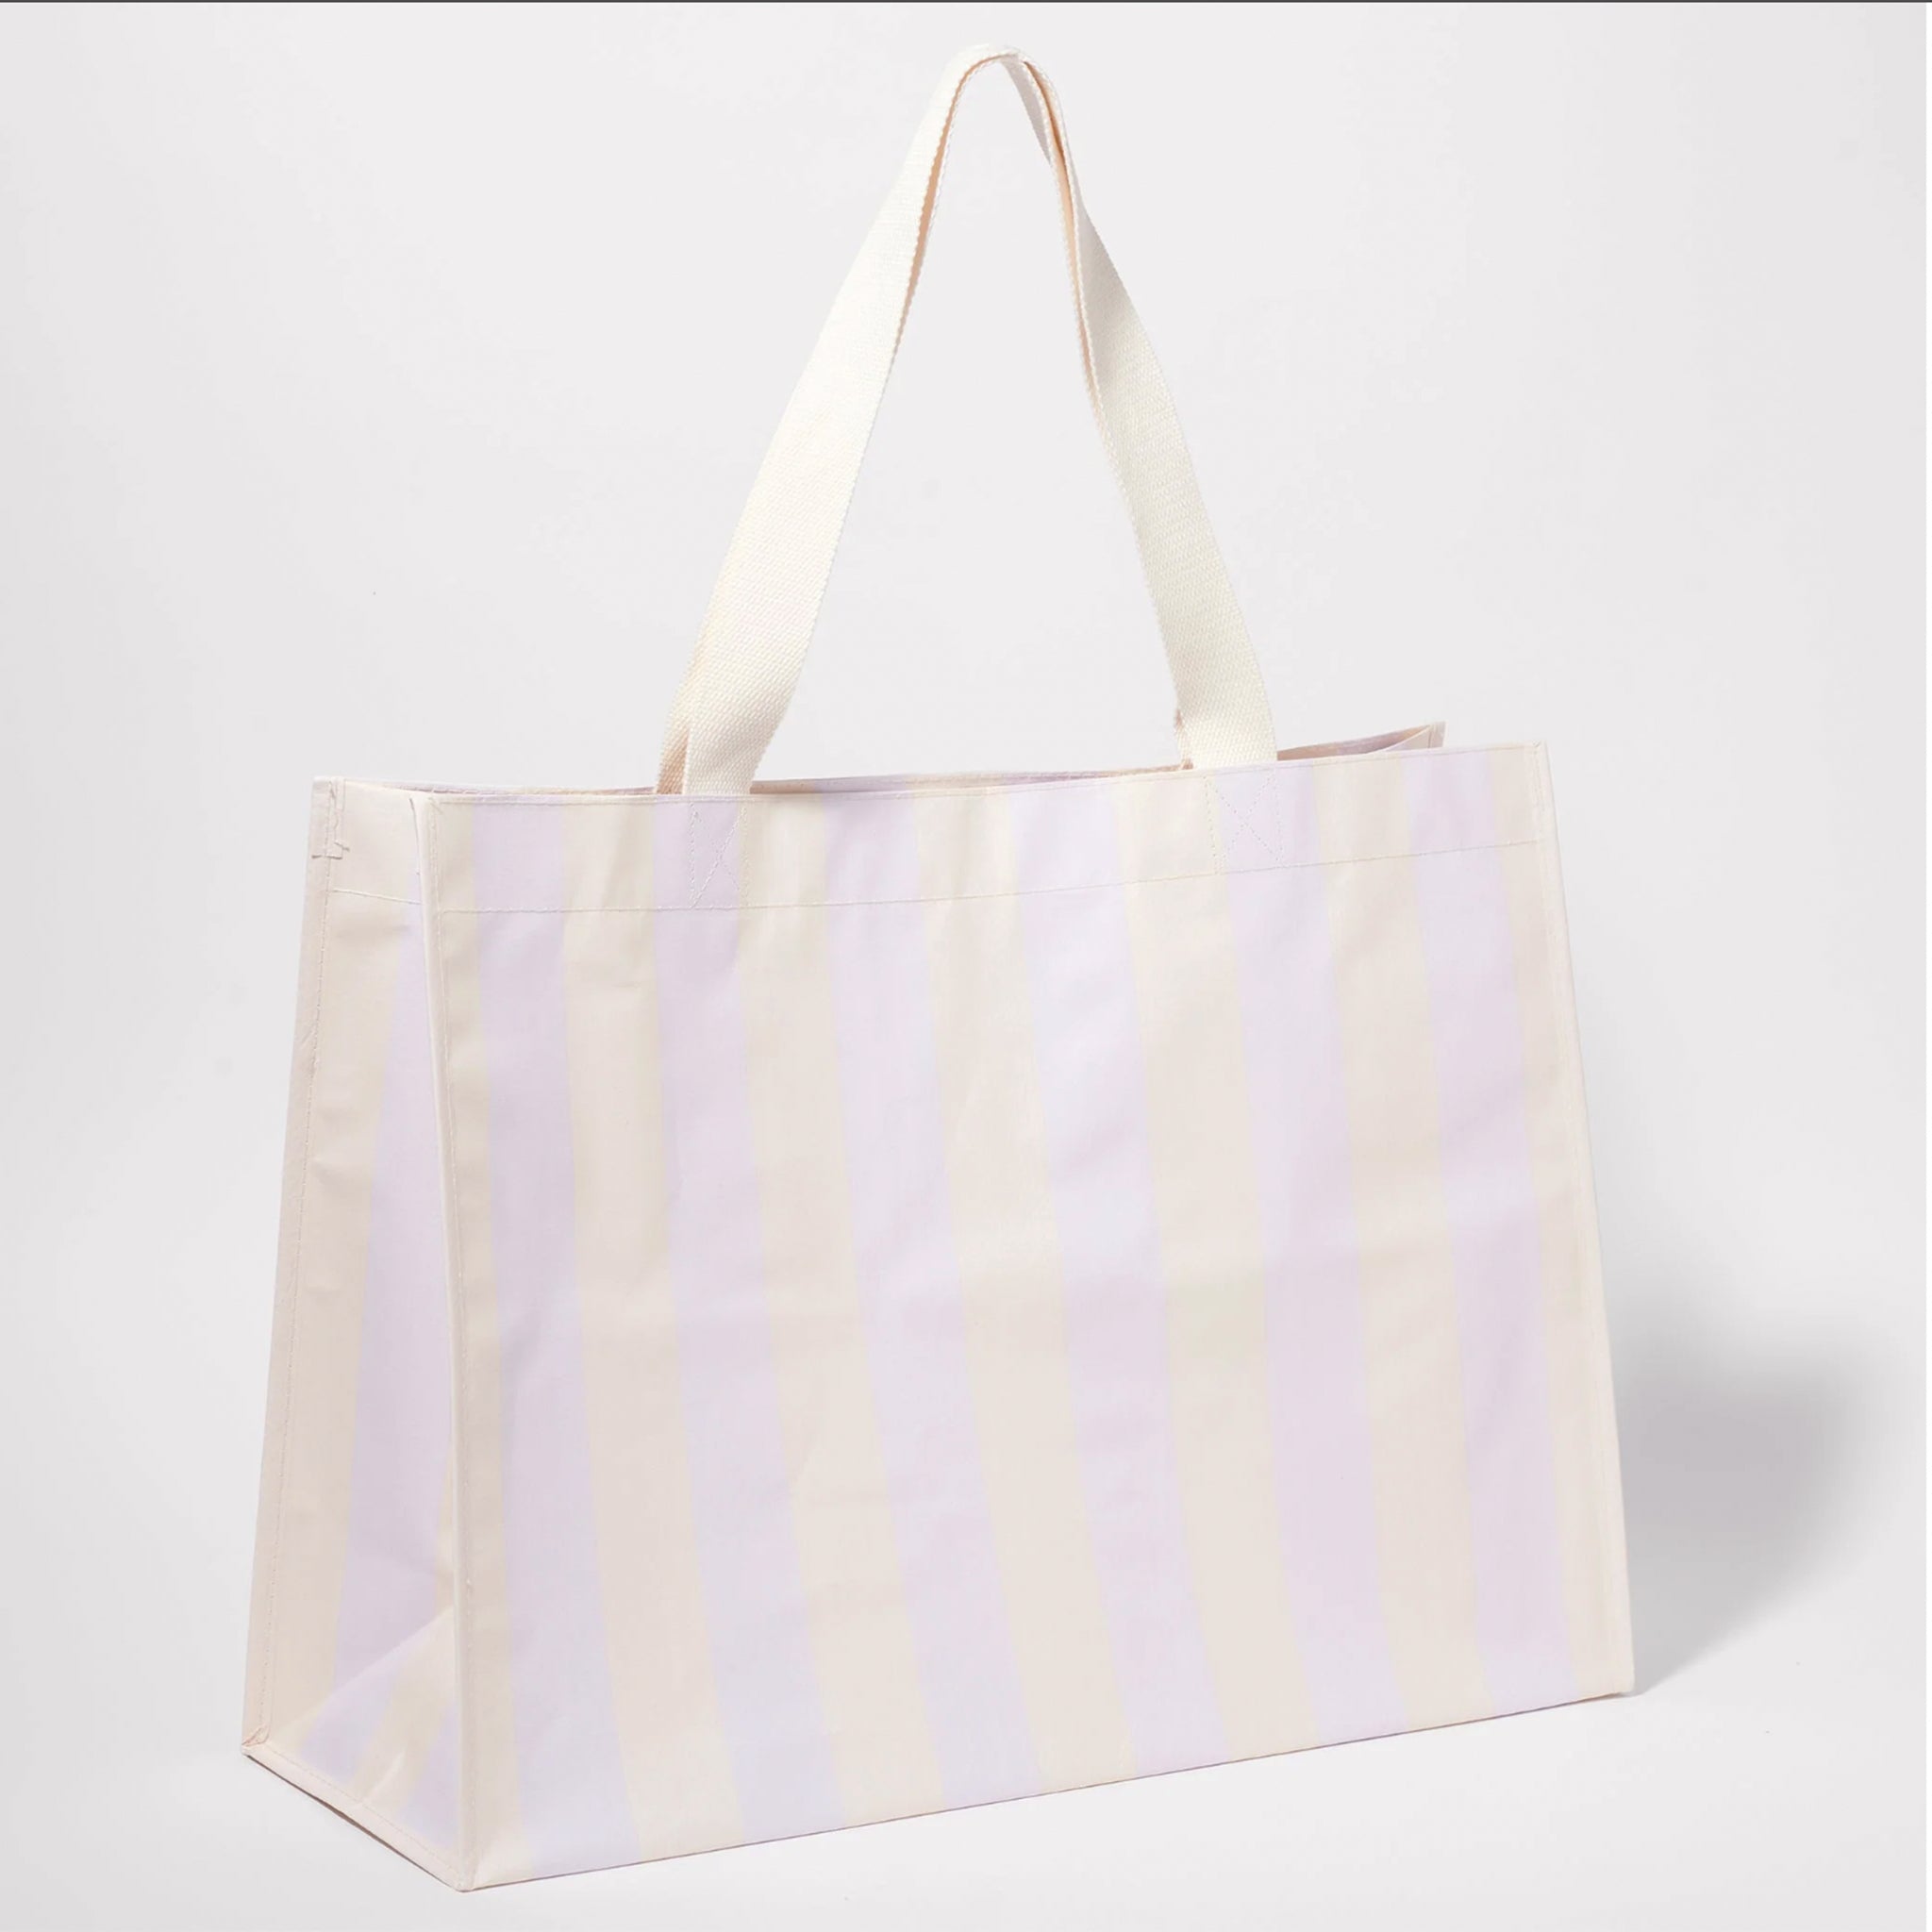 An oversized white and lilac striped beach tote with two shoulder straps.